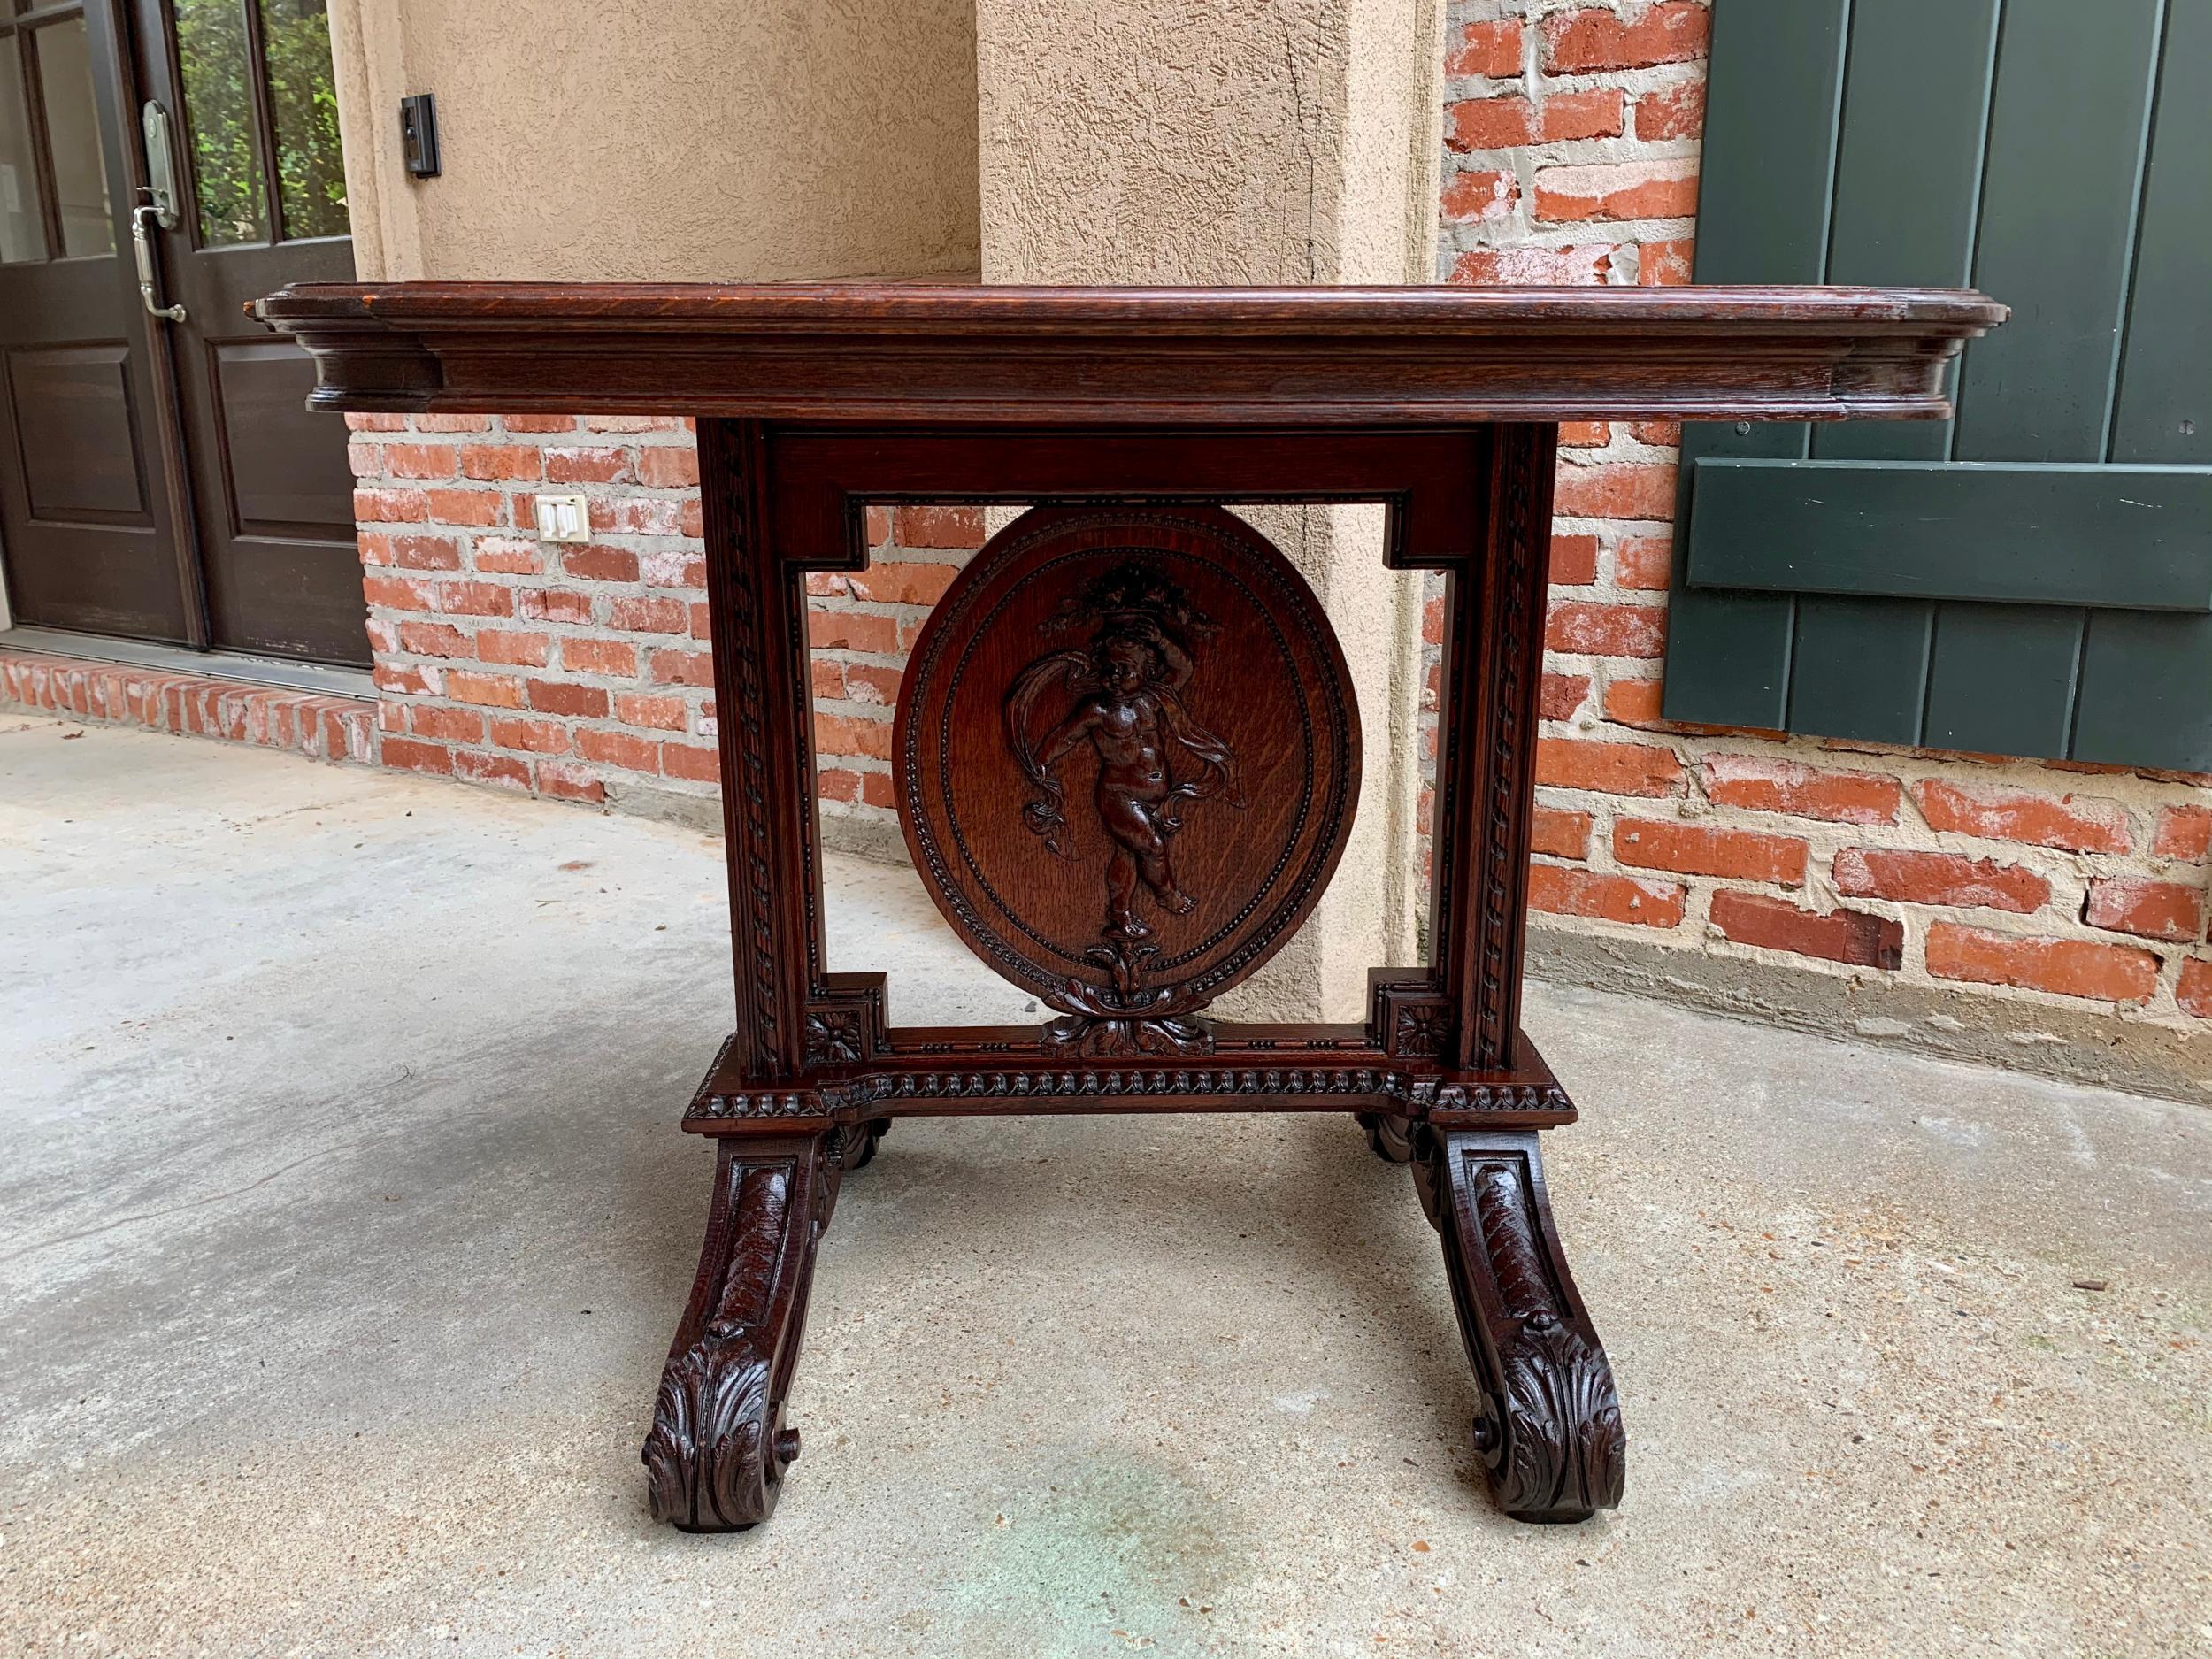 19th century French carved oak sofa side table Renaissance cherub angel

~Direct from France~
~Unique hand carvings on this versatile antique French side table~
~Lower table highlight is the center oval medallion with a full figural carved standing